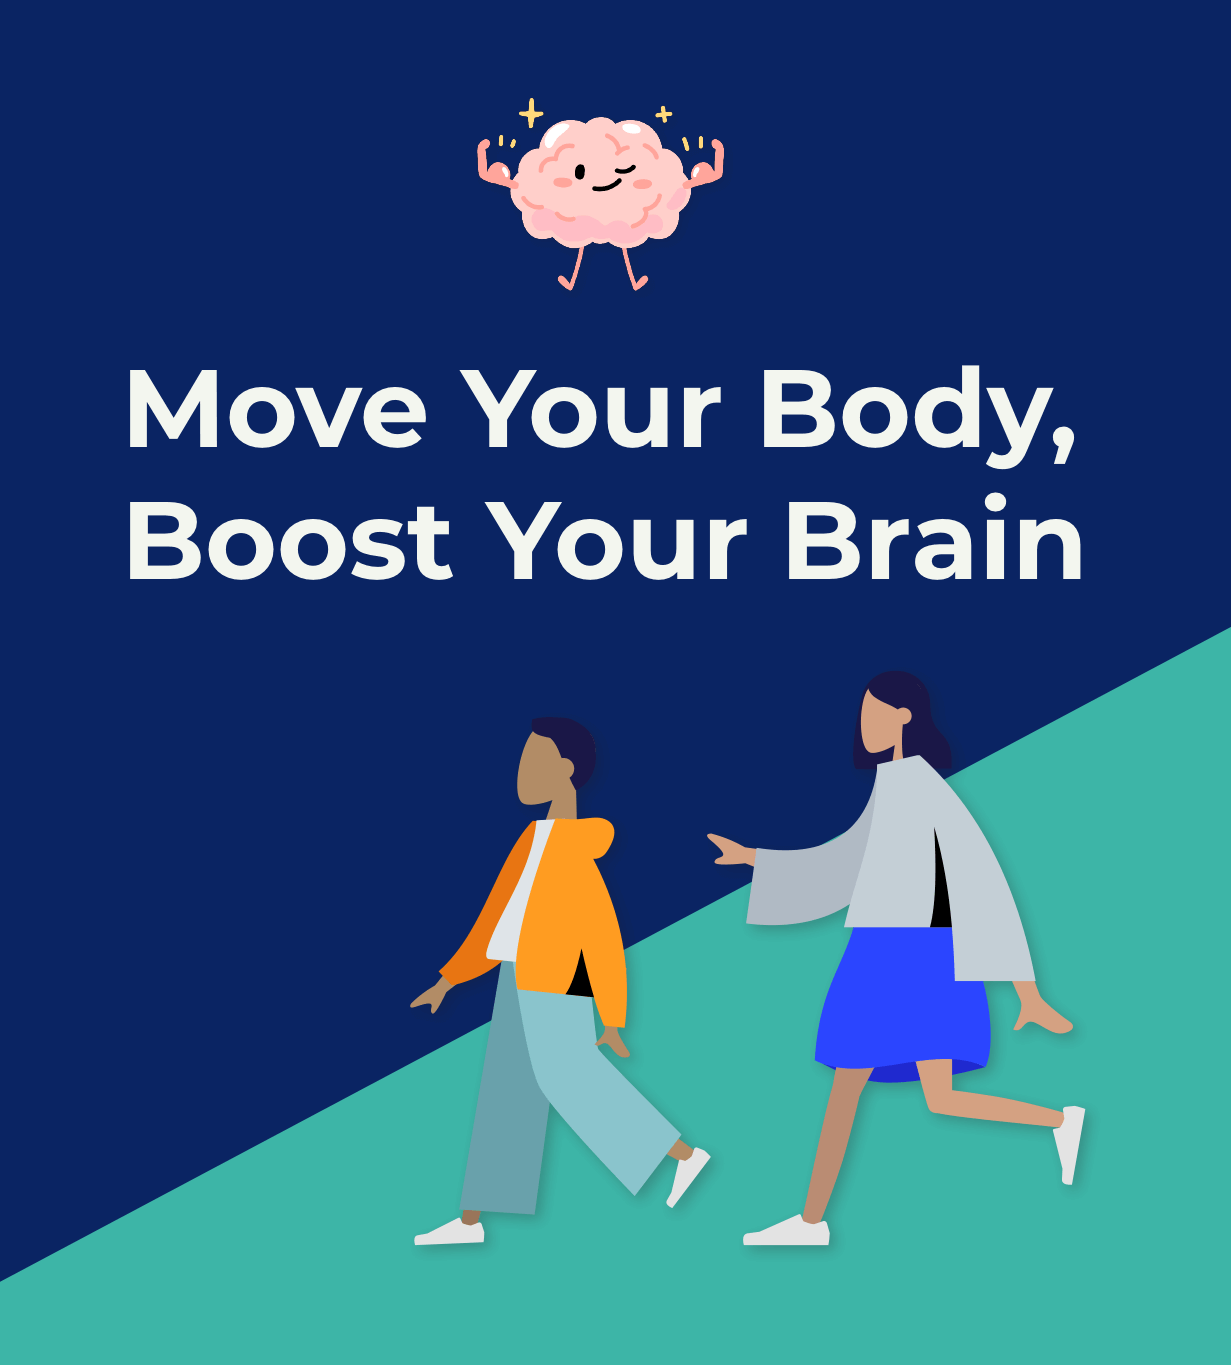 Move Your Body, Boost Your Brain